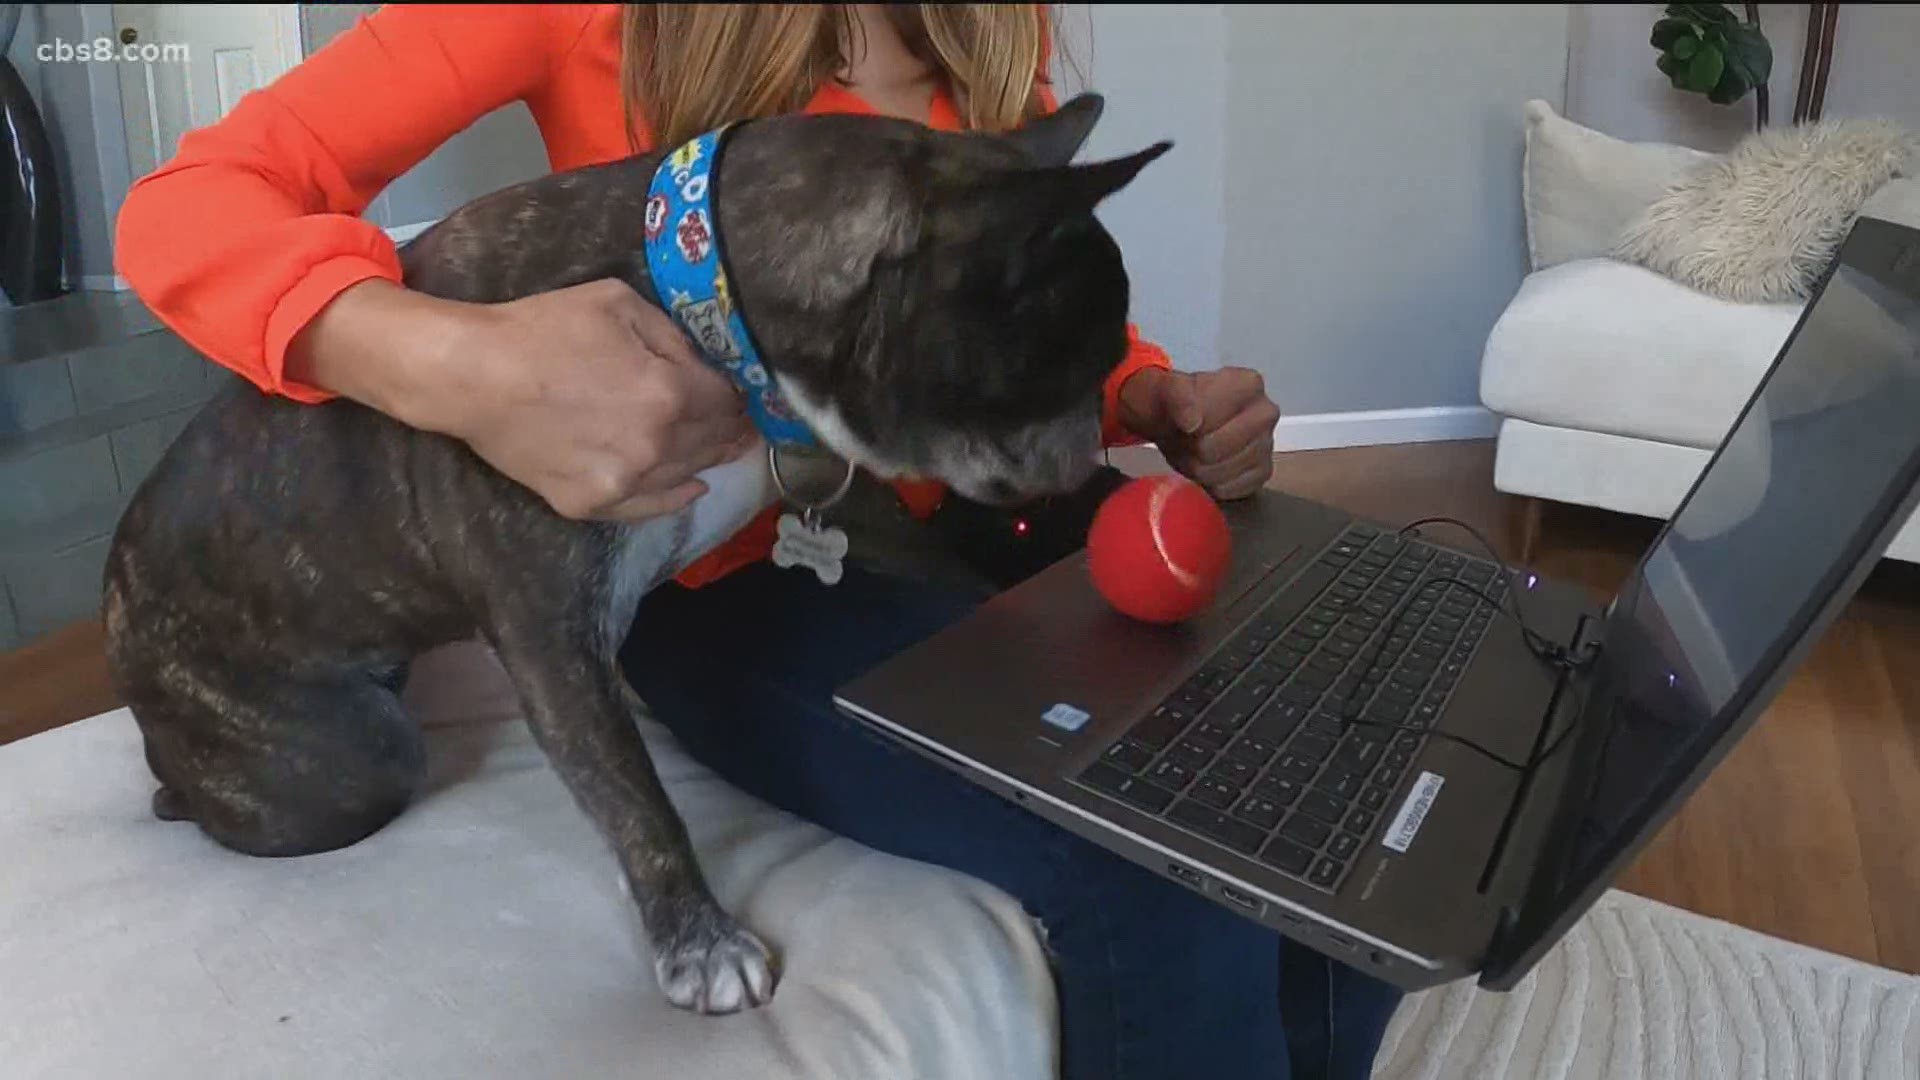 A certified dog trainer has some tips on how to help your dog adjust to life after quarantine.